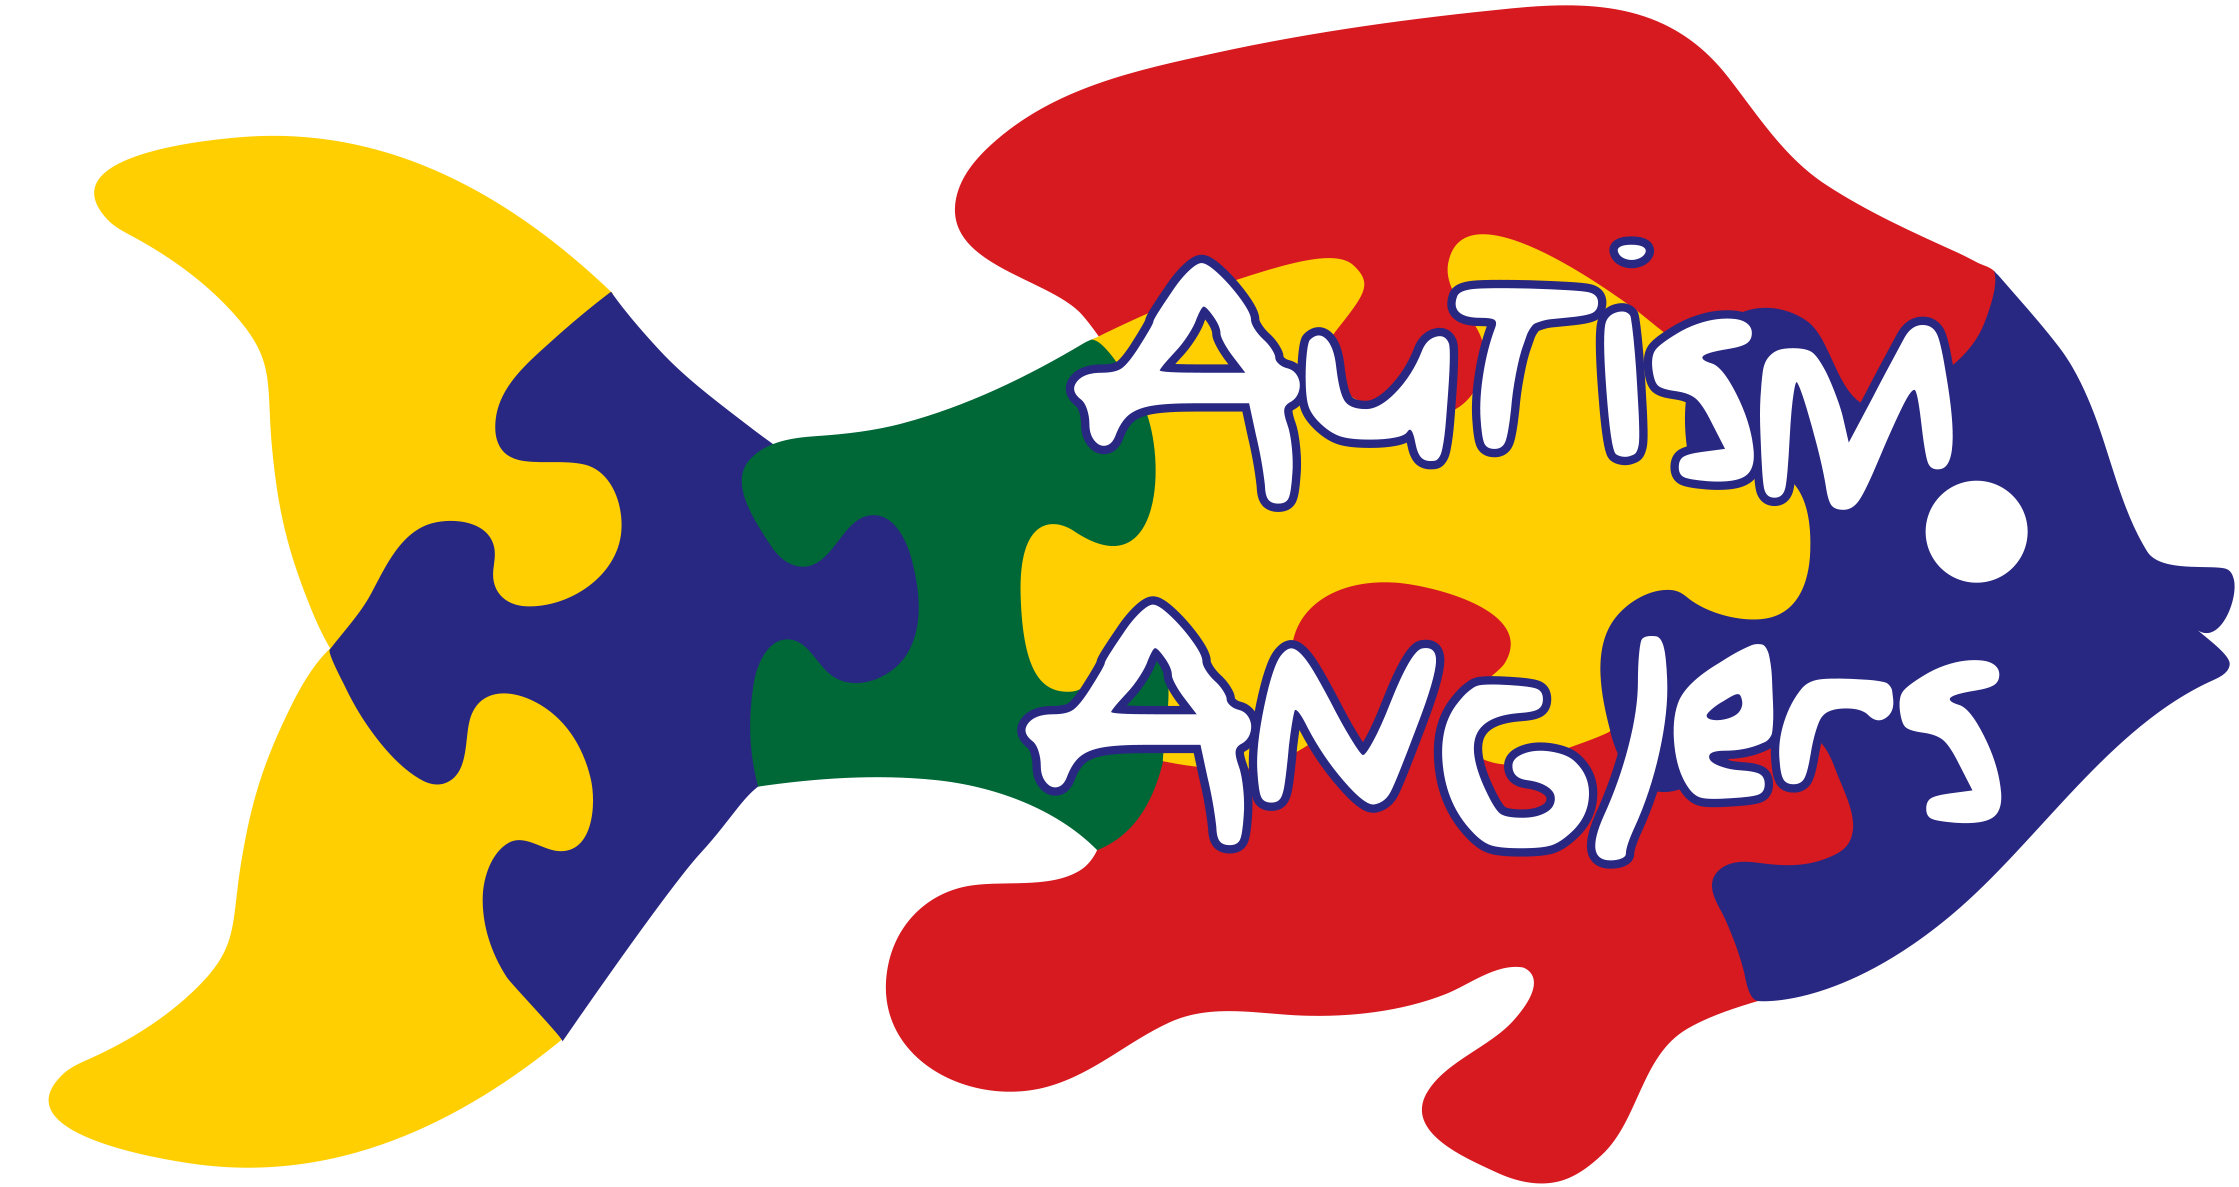 Autism Anglers Launches Fishing Program “Ausome Anglers”